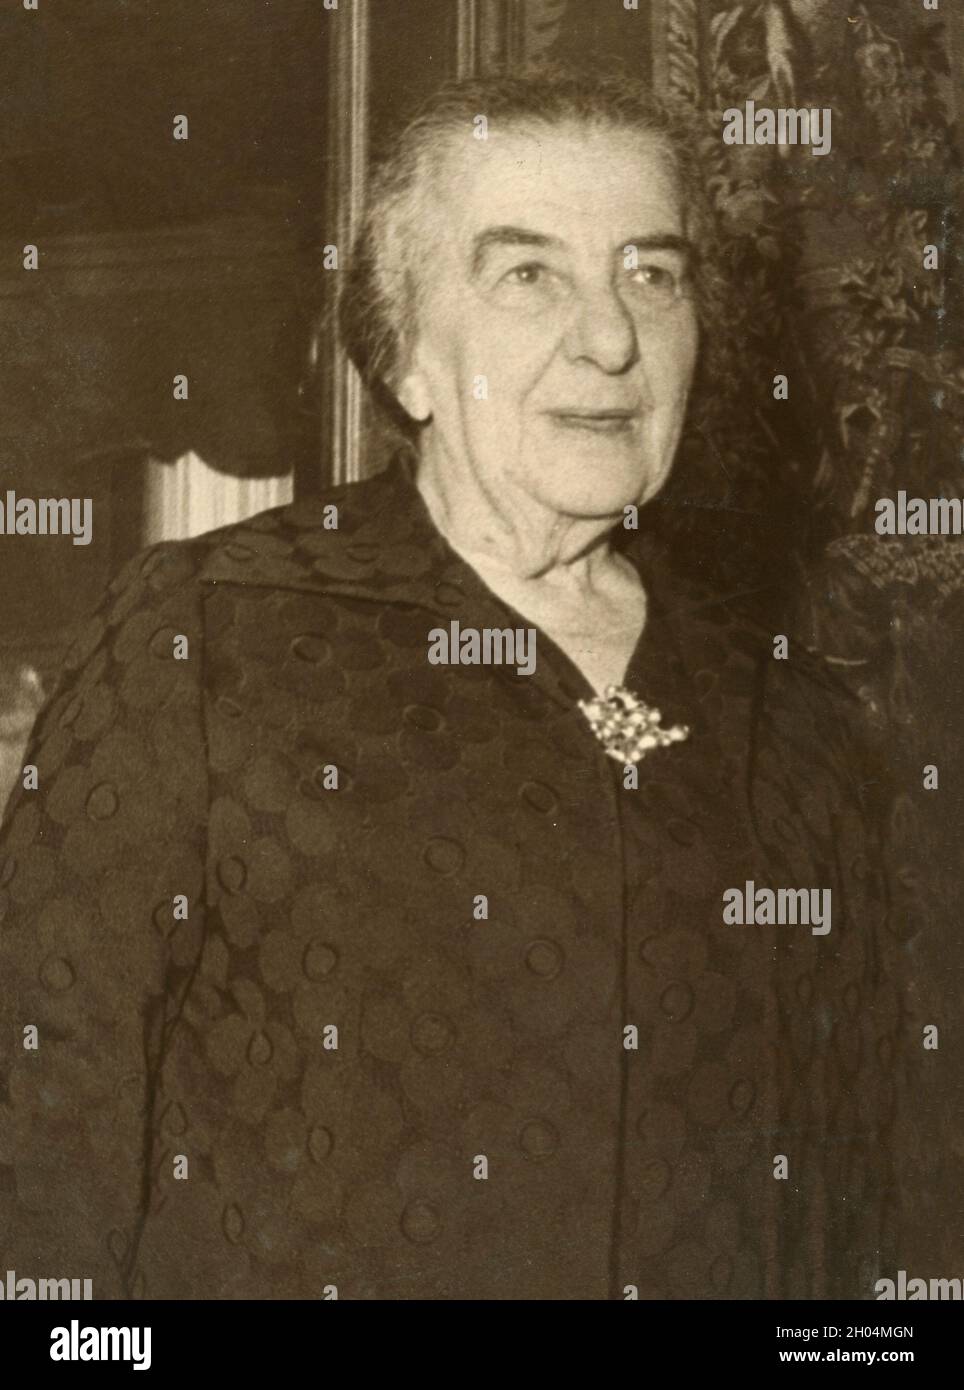 Israeli politician and Prime Minister Golda Meir, 1970s Stock Photo